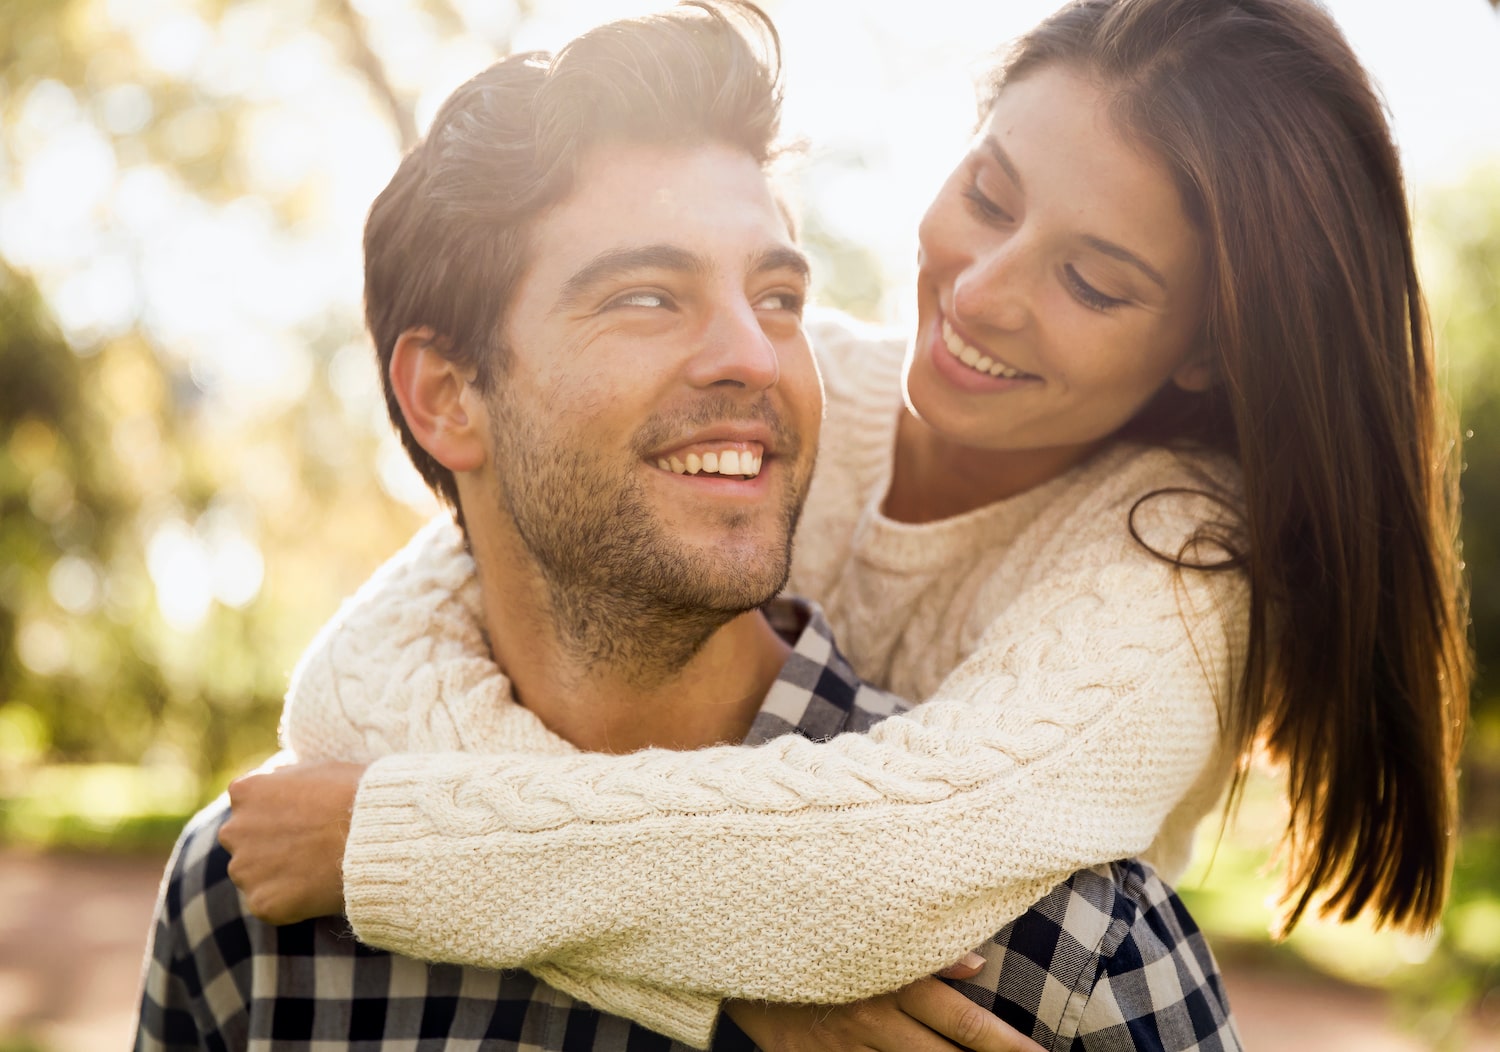 Building a Healthy Relationship That Will Last For a Lifetime